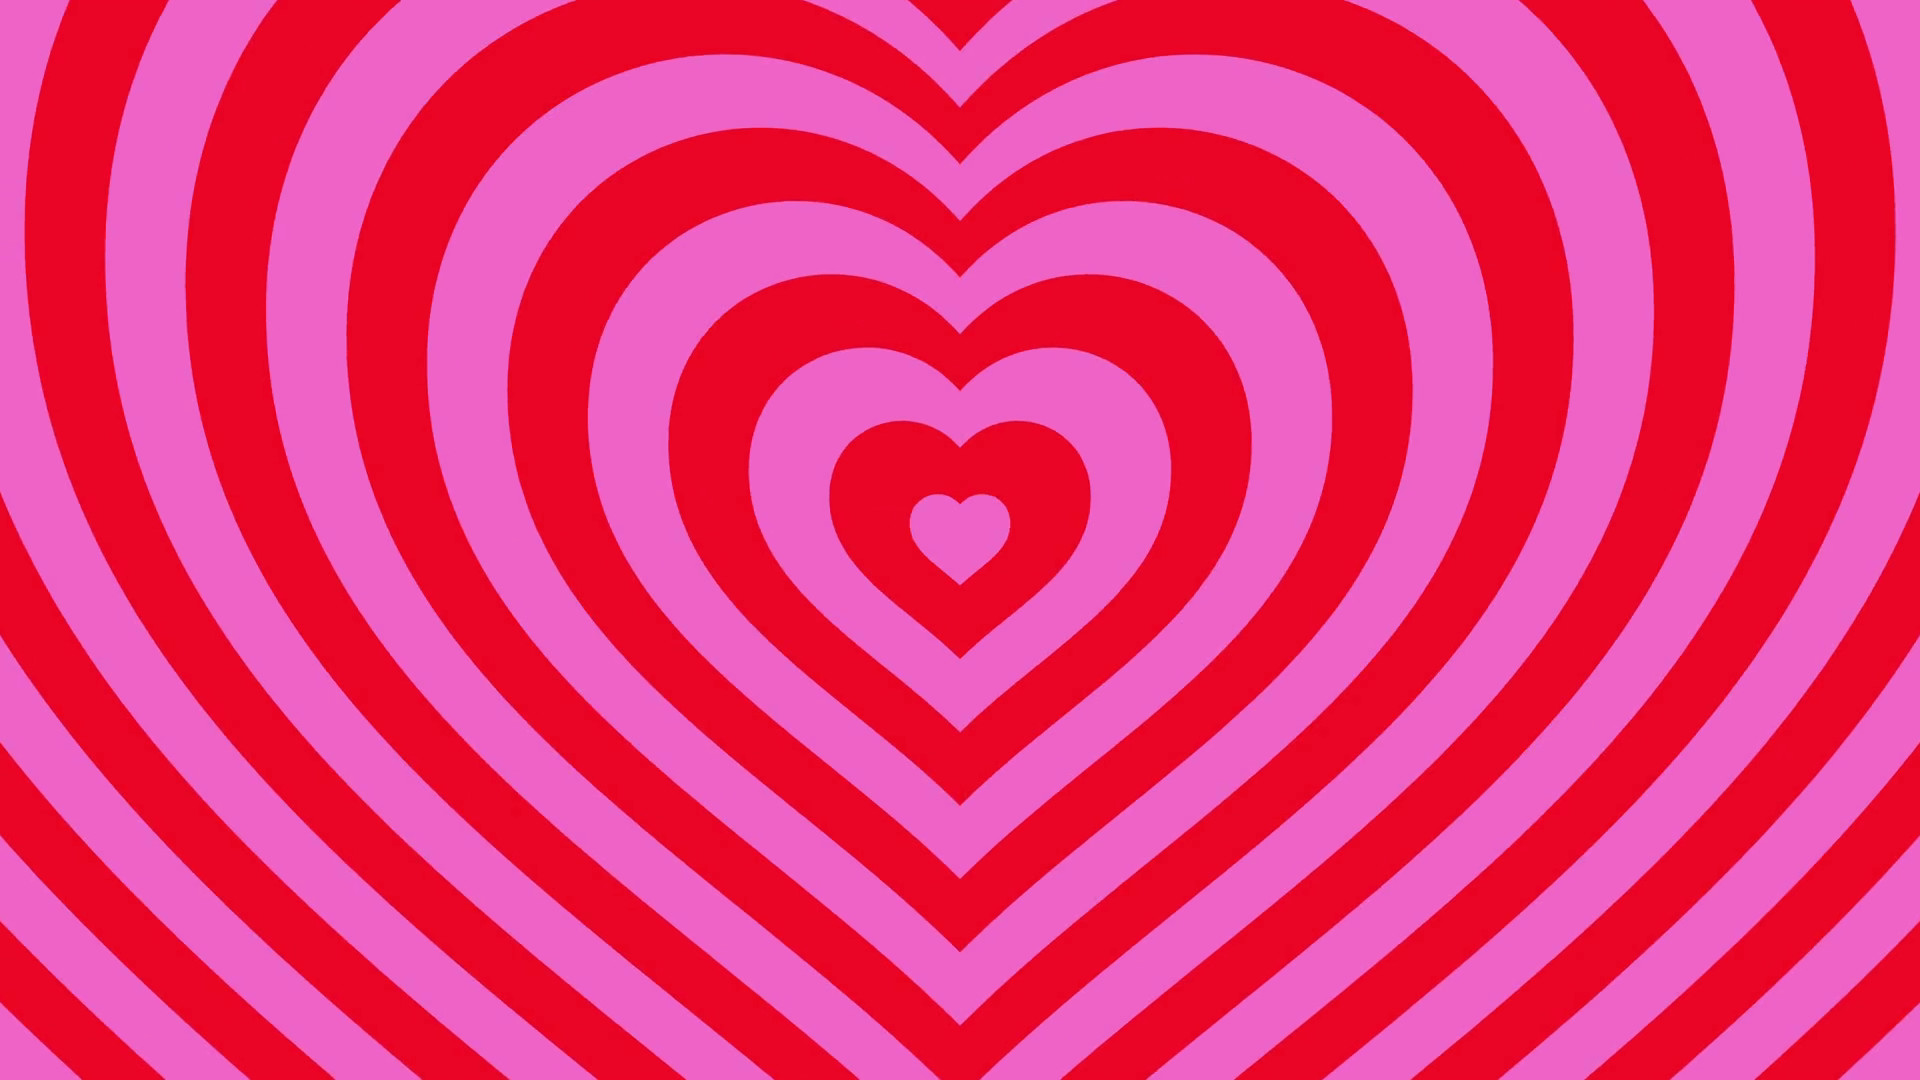 Love Hearts Background.